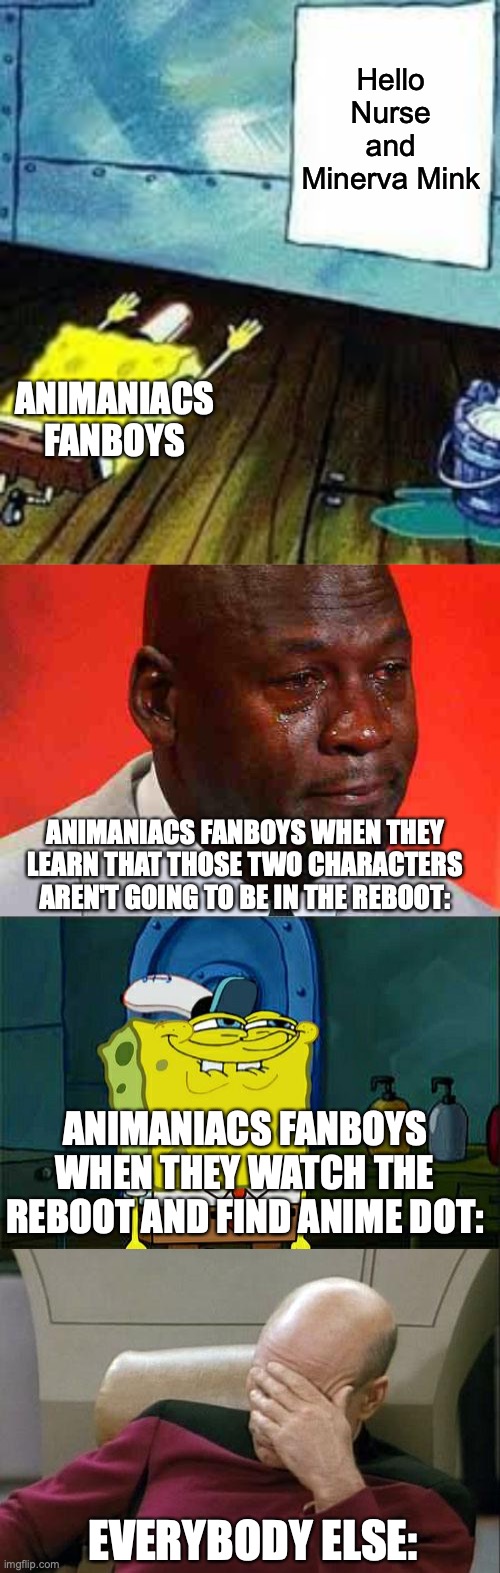 Animaniacs fanboys in a nutshell. (I'll do one on fangirls later) | Hello Nurse and Minerva Mink; ANIMANIACS FANBOYS; ANIMANIACS FANBOYS WHEN THEY LEARN THAT THOSE TWO CHARACTERS AREN'T GOING TO BE IN THE REBOOT:; ANIMANIACS FANBOYS WHEN THEY WATCH THE REBOOT AND FIND ANIME DOT:; EVERYBODY ELSE: | image tagged in spongebob worship,crying michael jordan,memes,don't you squidward,captain picard facepalm,animaniacs | made w/ Imgflip meme maker